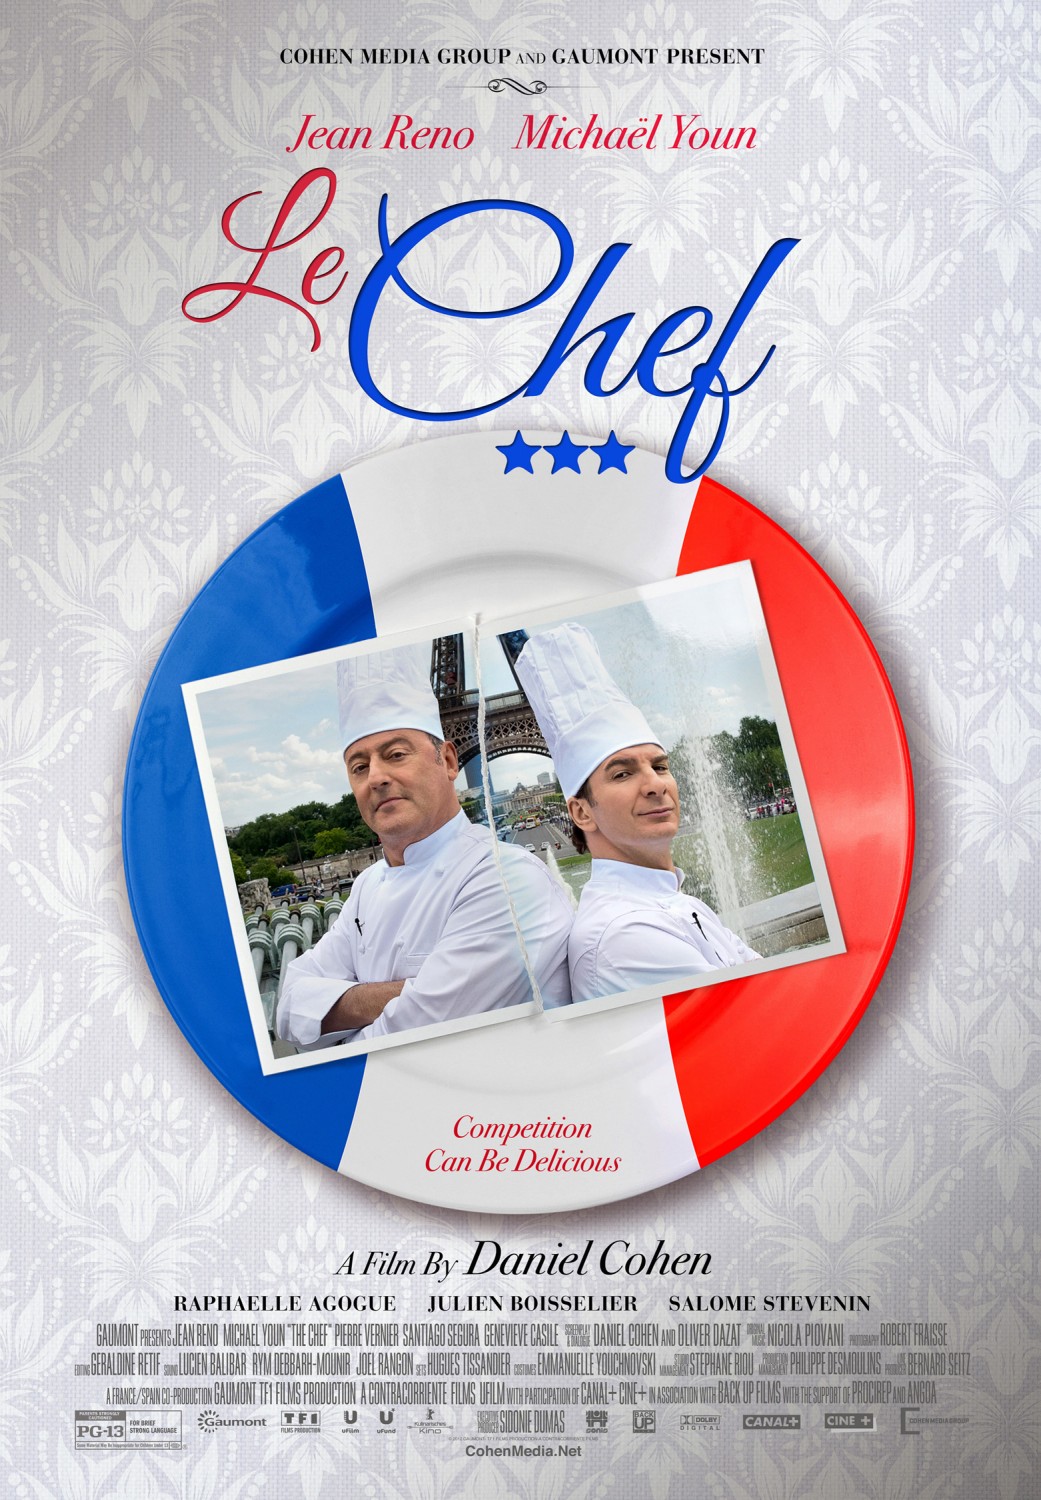 Extra Large Movie Poster Image for Comme un chef (#5 of 5)